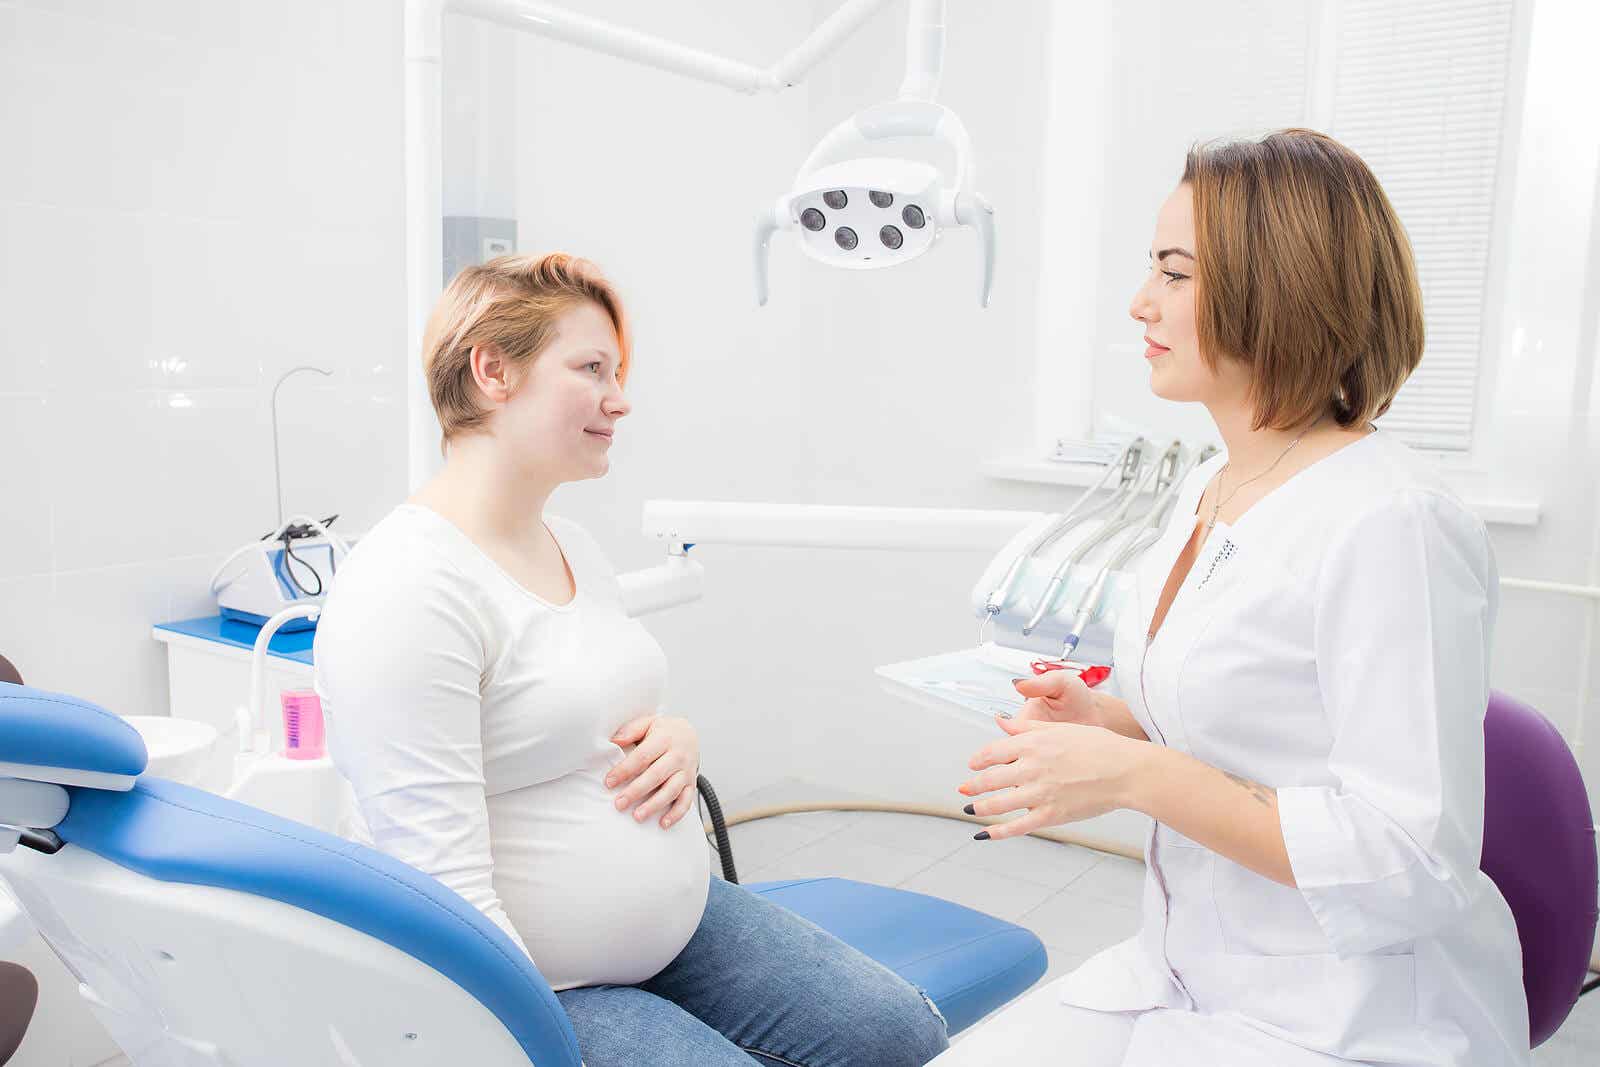 A pregnant woman at the dentist office.